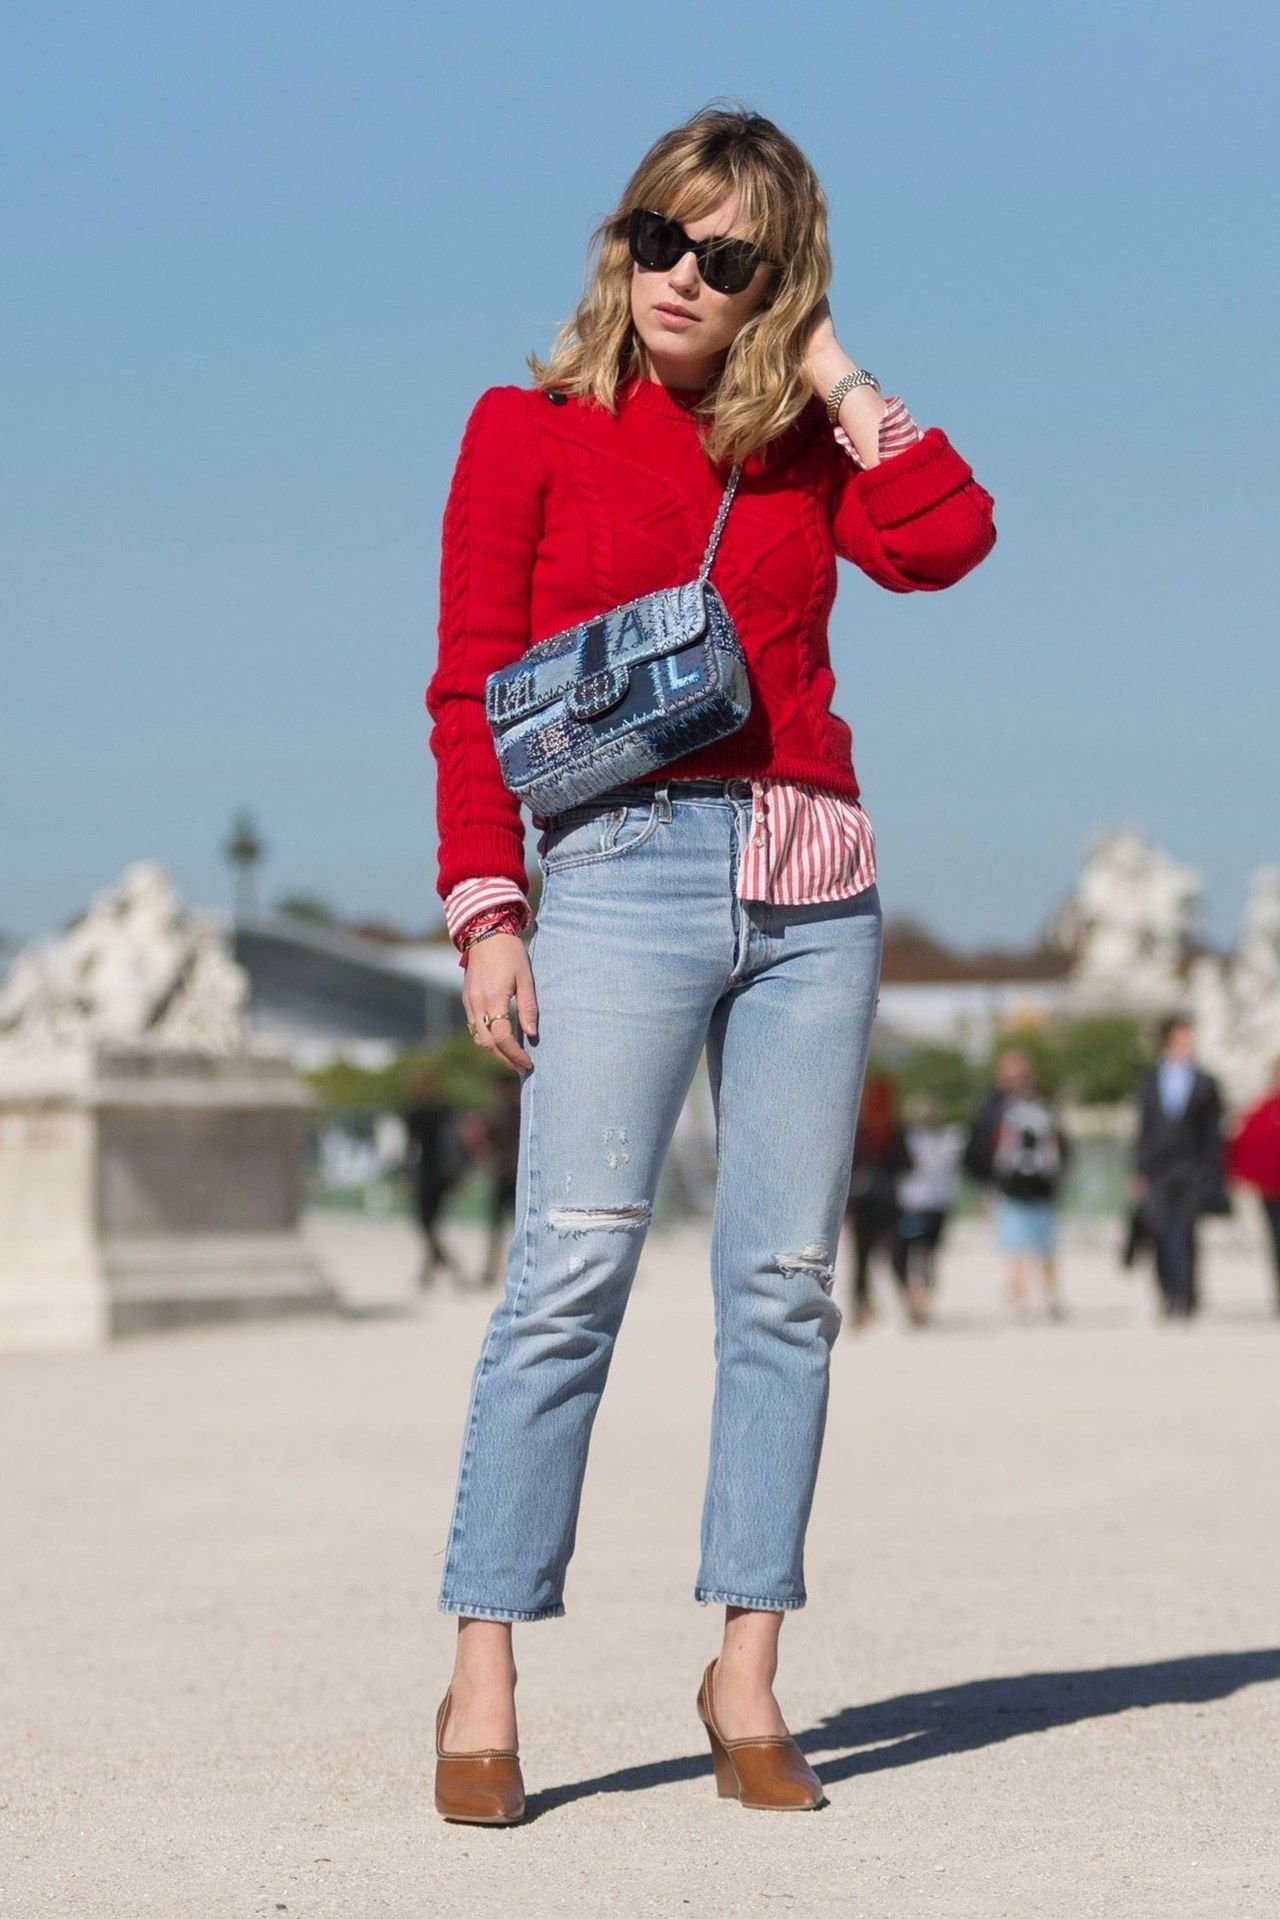 zima red outfit ideas melodie jeng sweater button down jeans